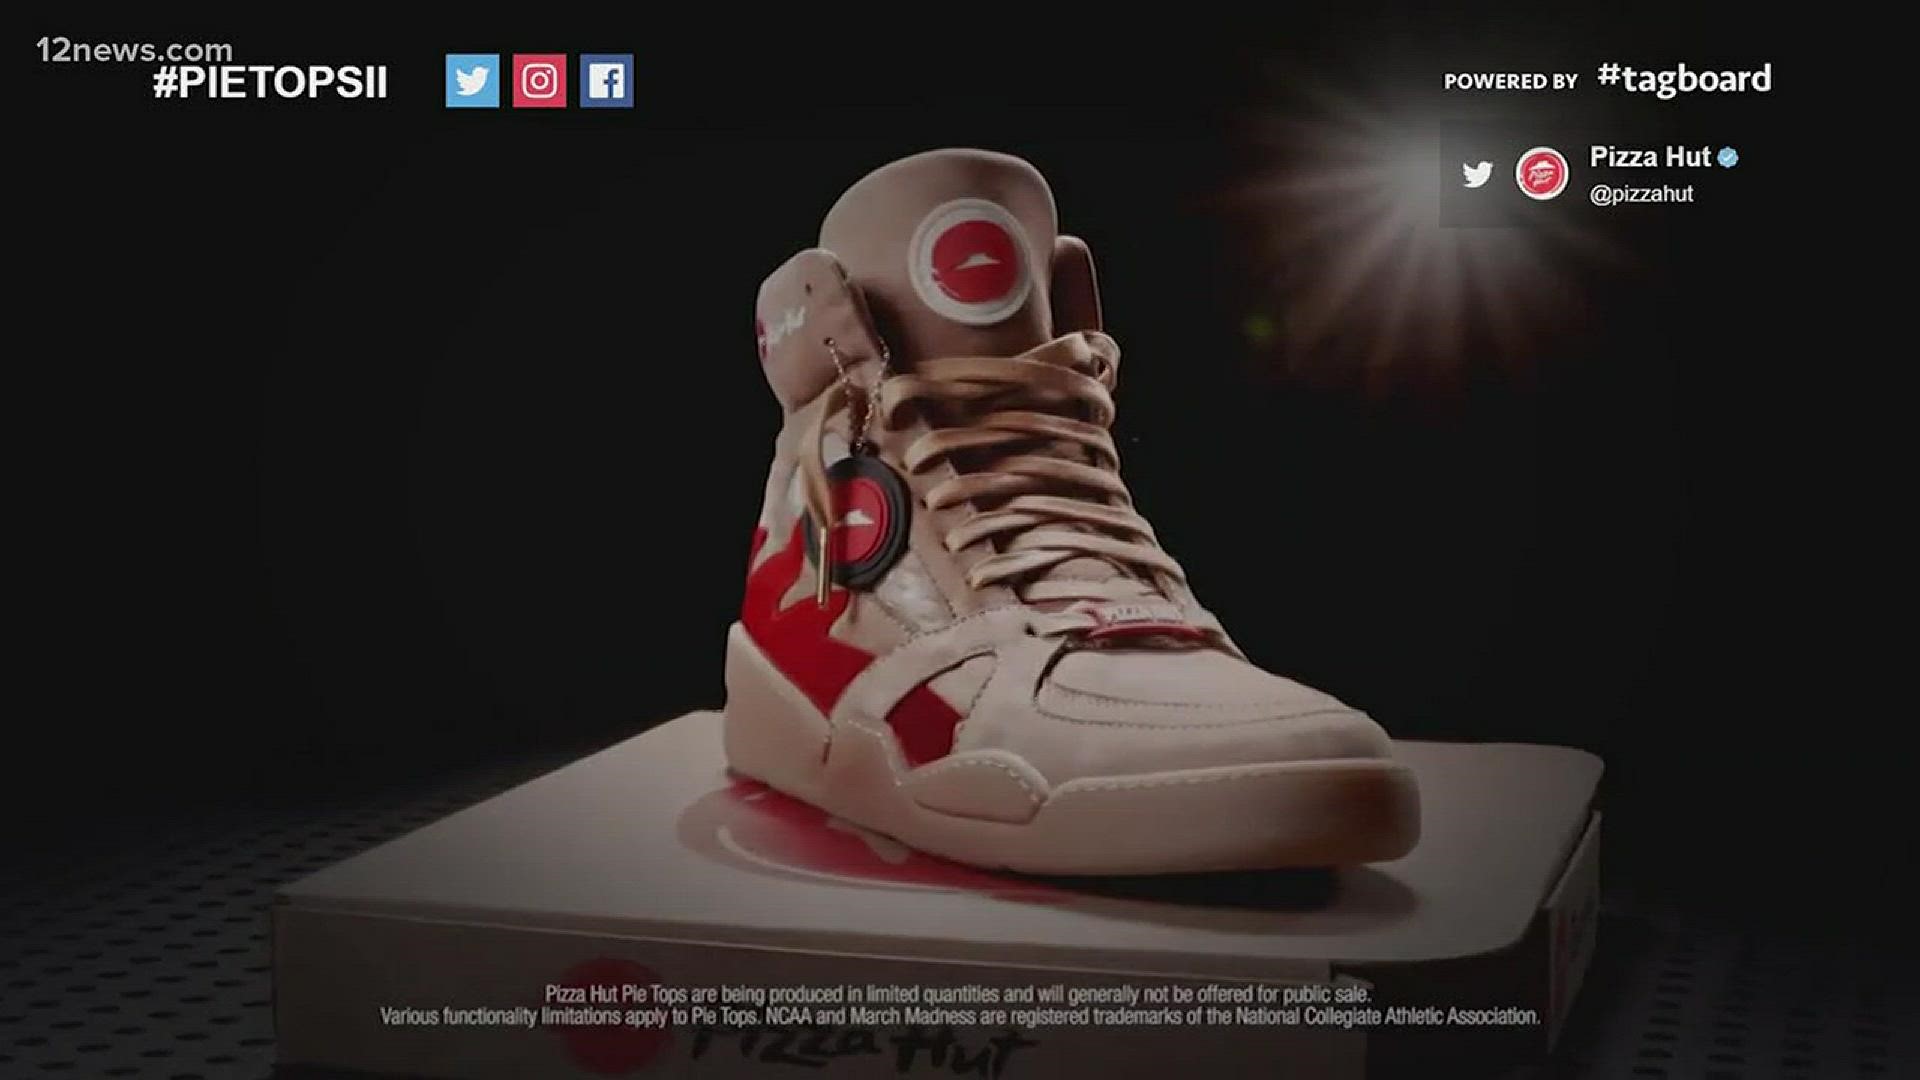 Pizza Hut pie top sneakers will order pizza for you